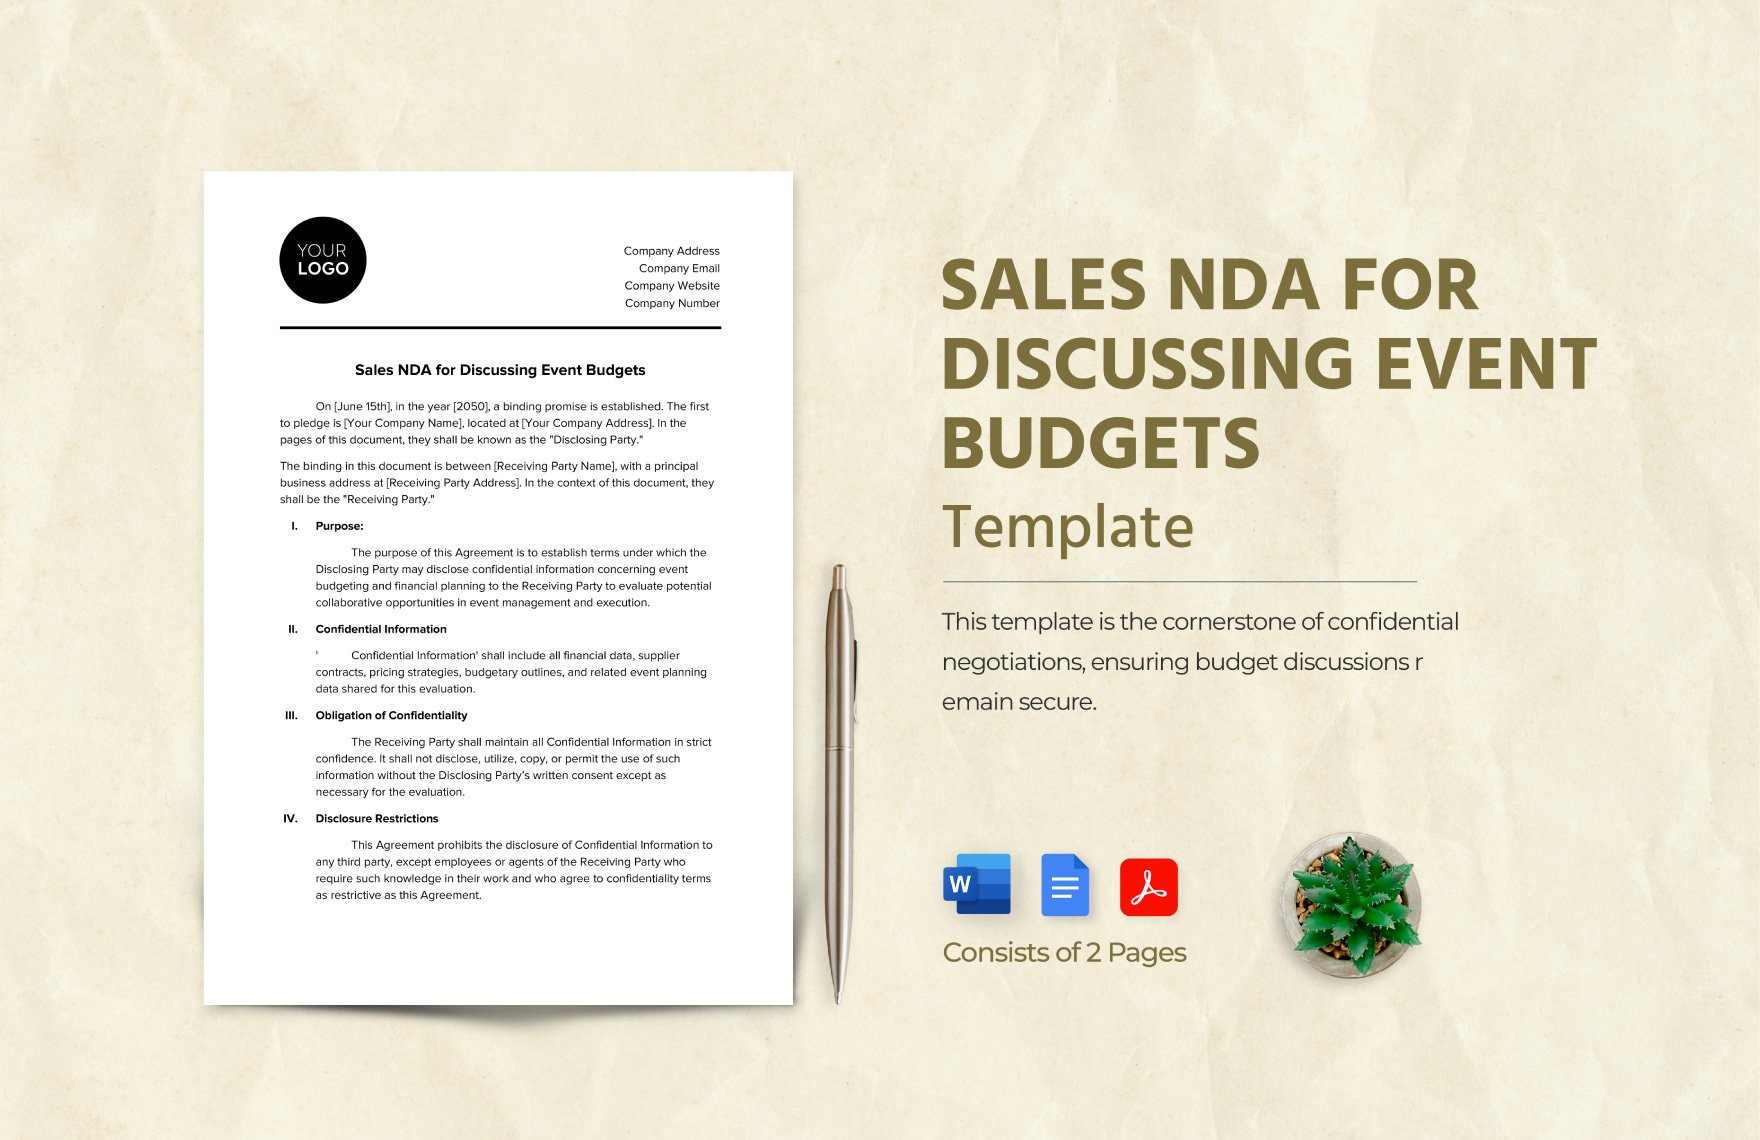 Sales NDA for Discussing Event Budgets Template in Word, Google Docs, PDF